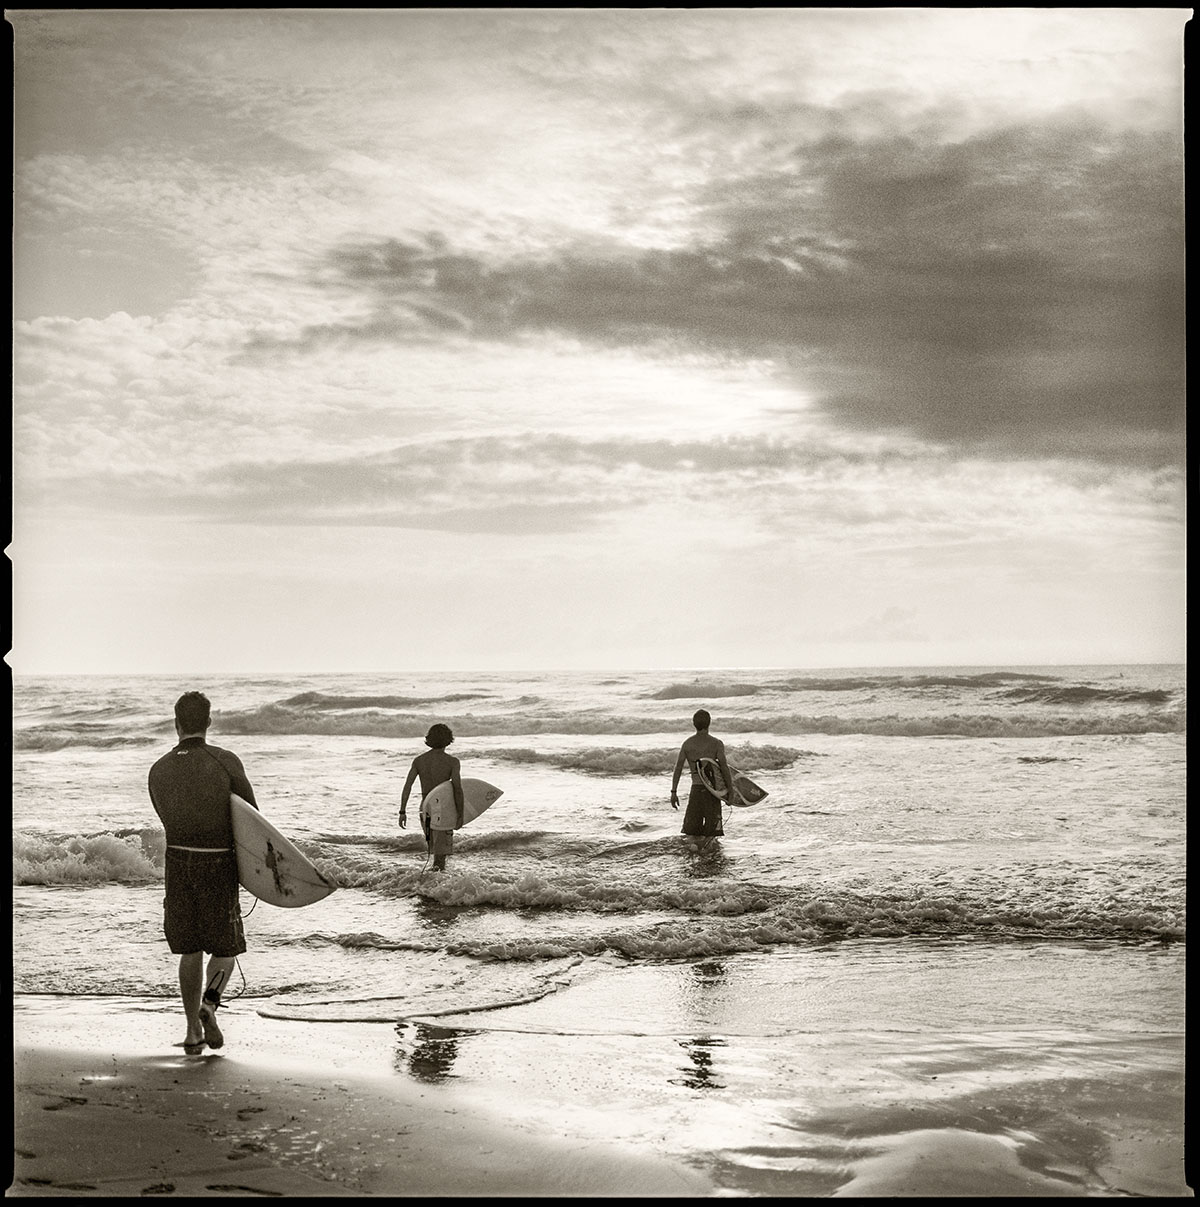 Surfers make their way into the waters of South Padre Island, Texas